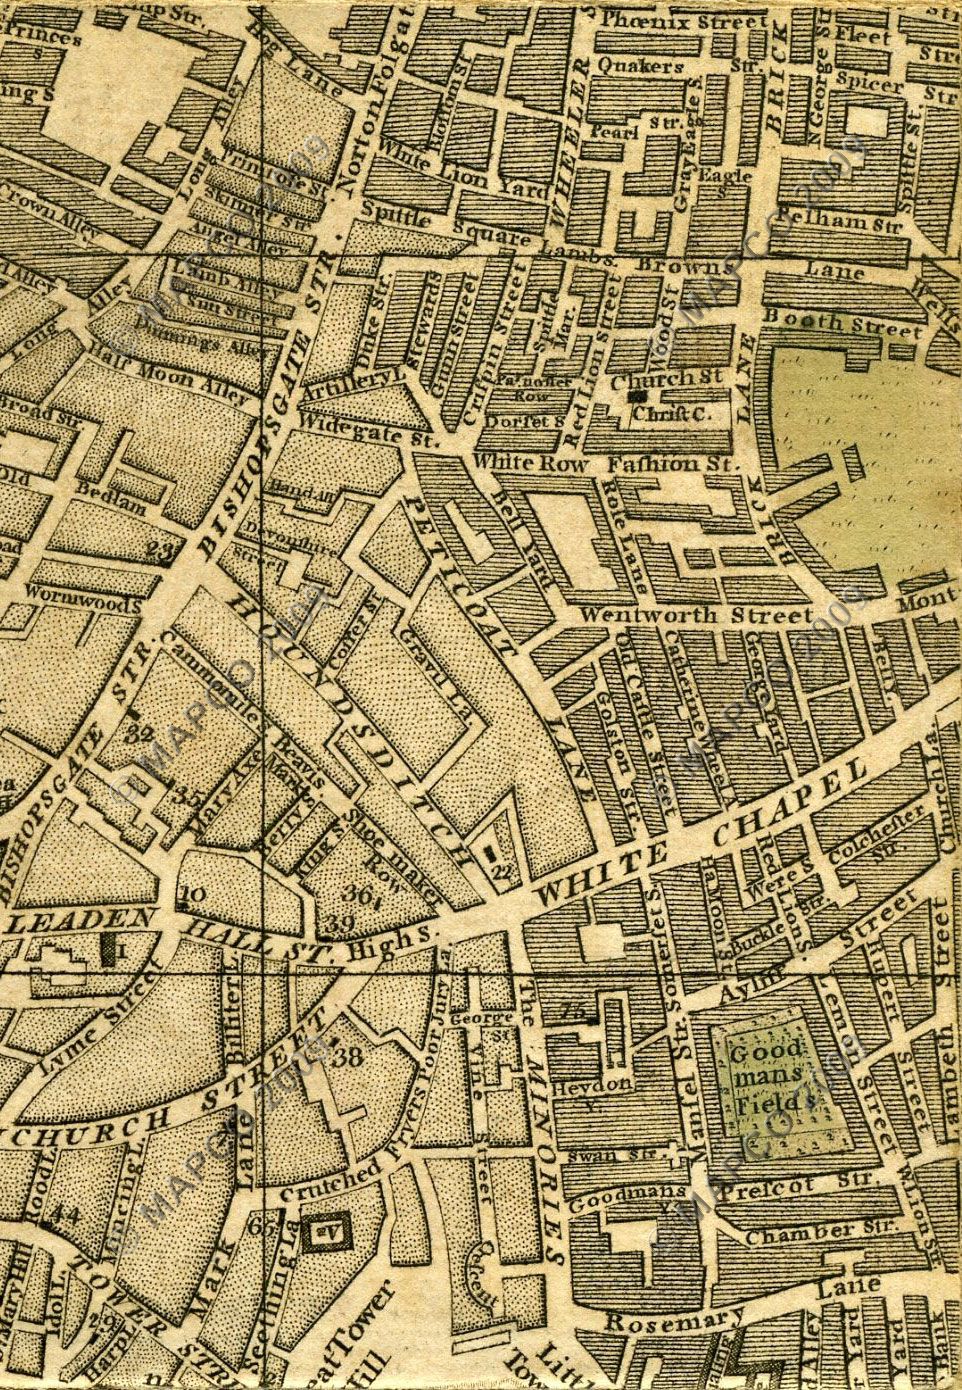 Bowles's Reduced New Pocket Plan Of The Cities Of London And Westminster With The Borough Of Southwark, Exhibiting The New Buildings To The Year 1775.